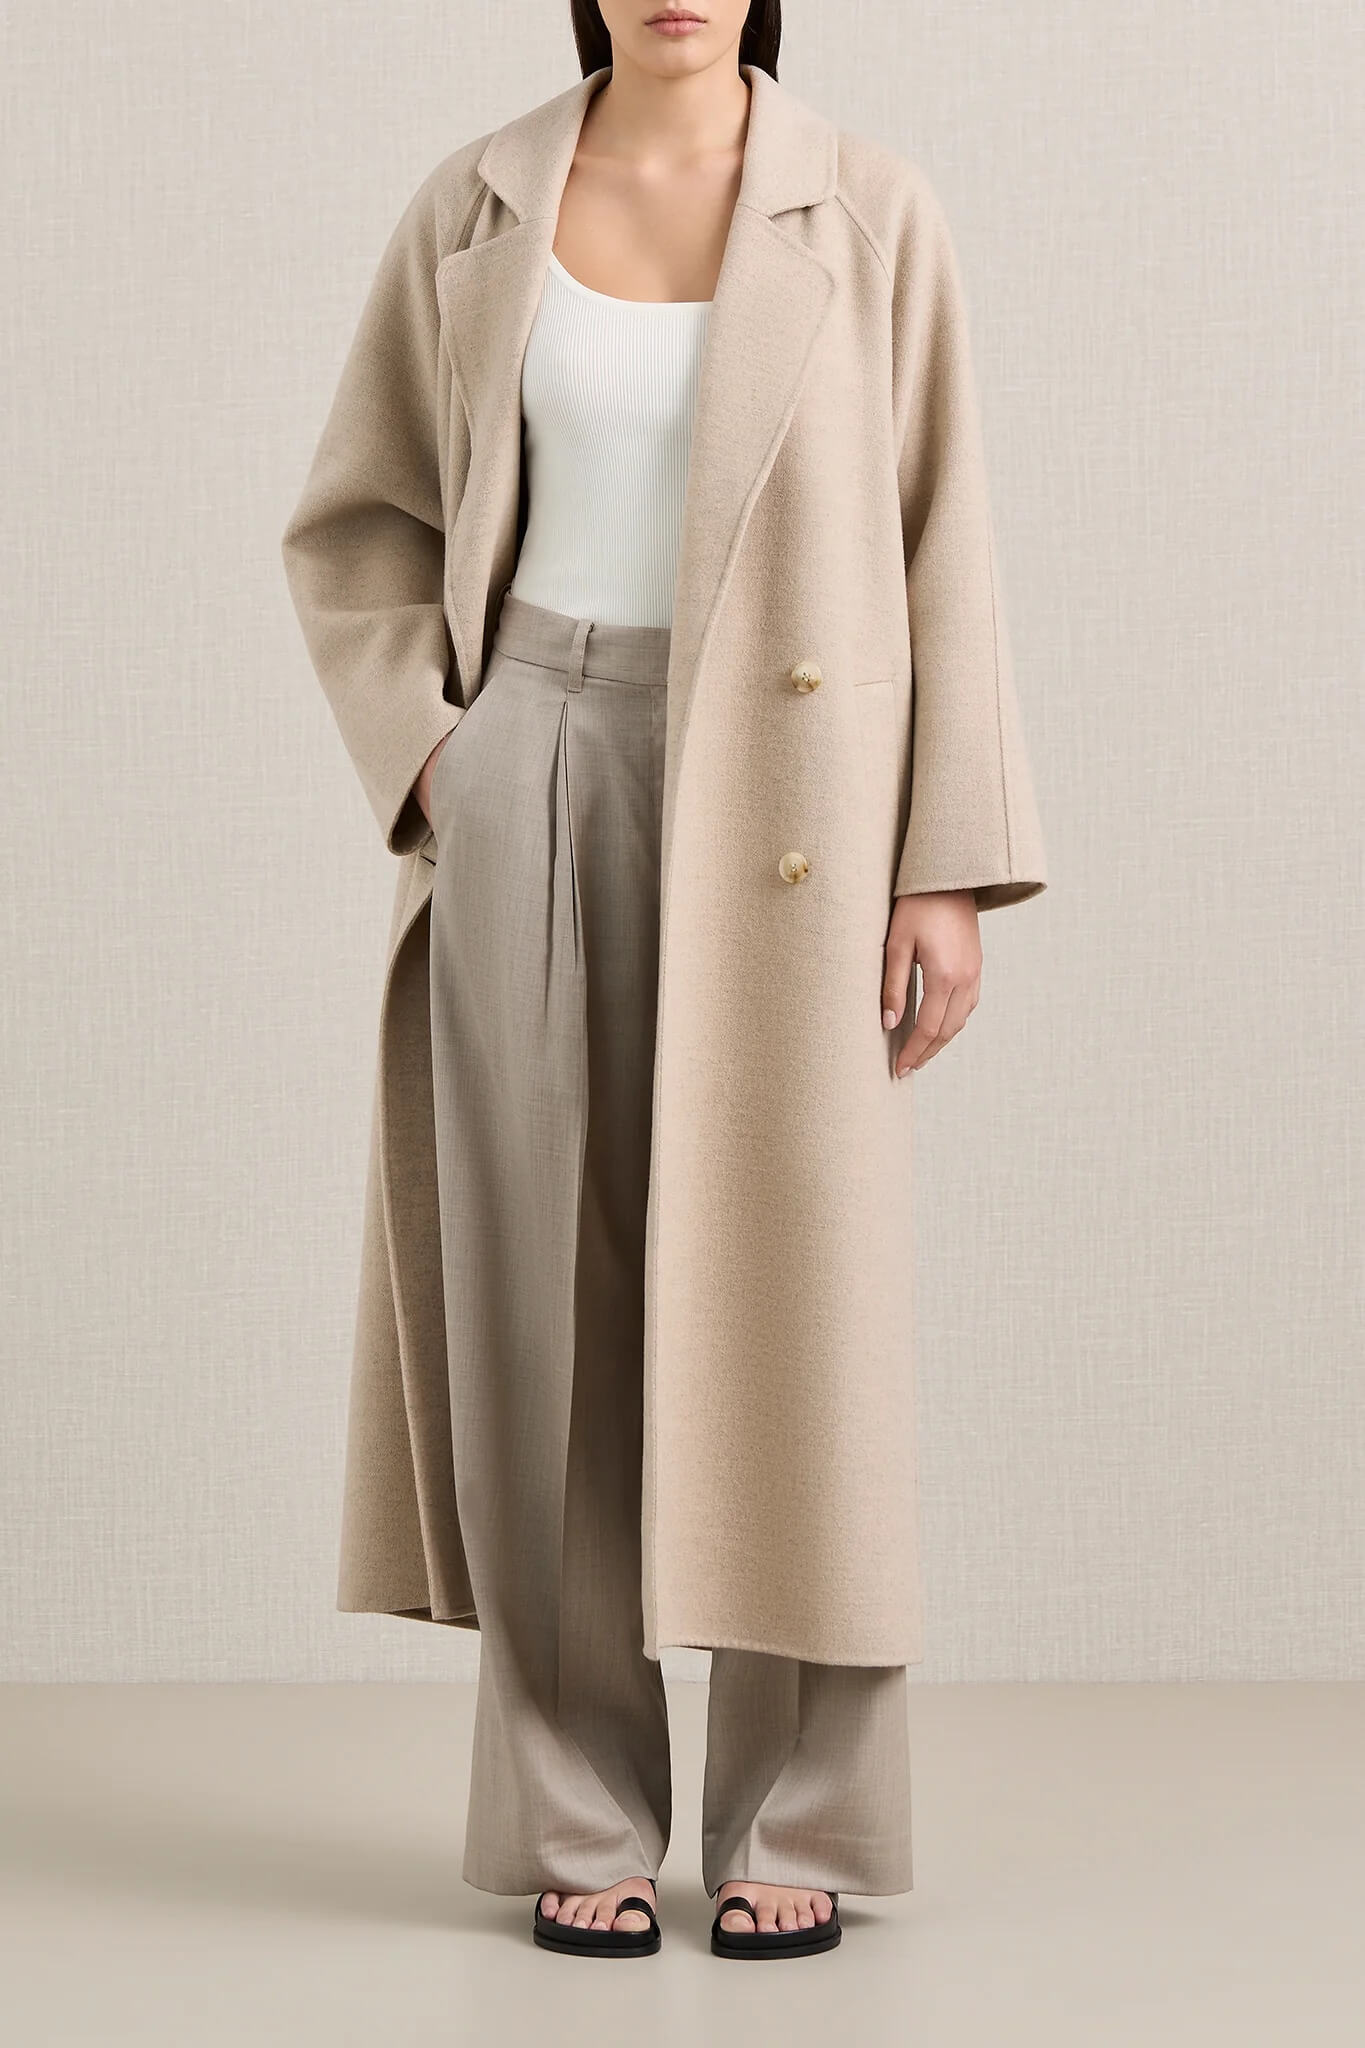 The A.EMERY Evans Coat in Almond Melange available at The New Trend.